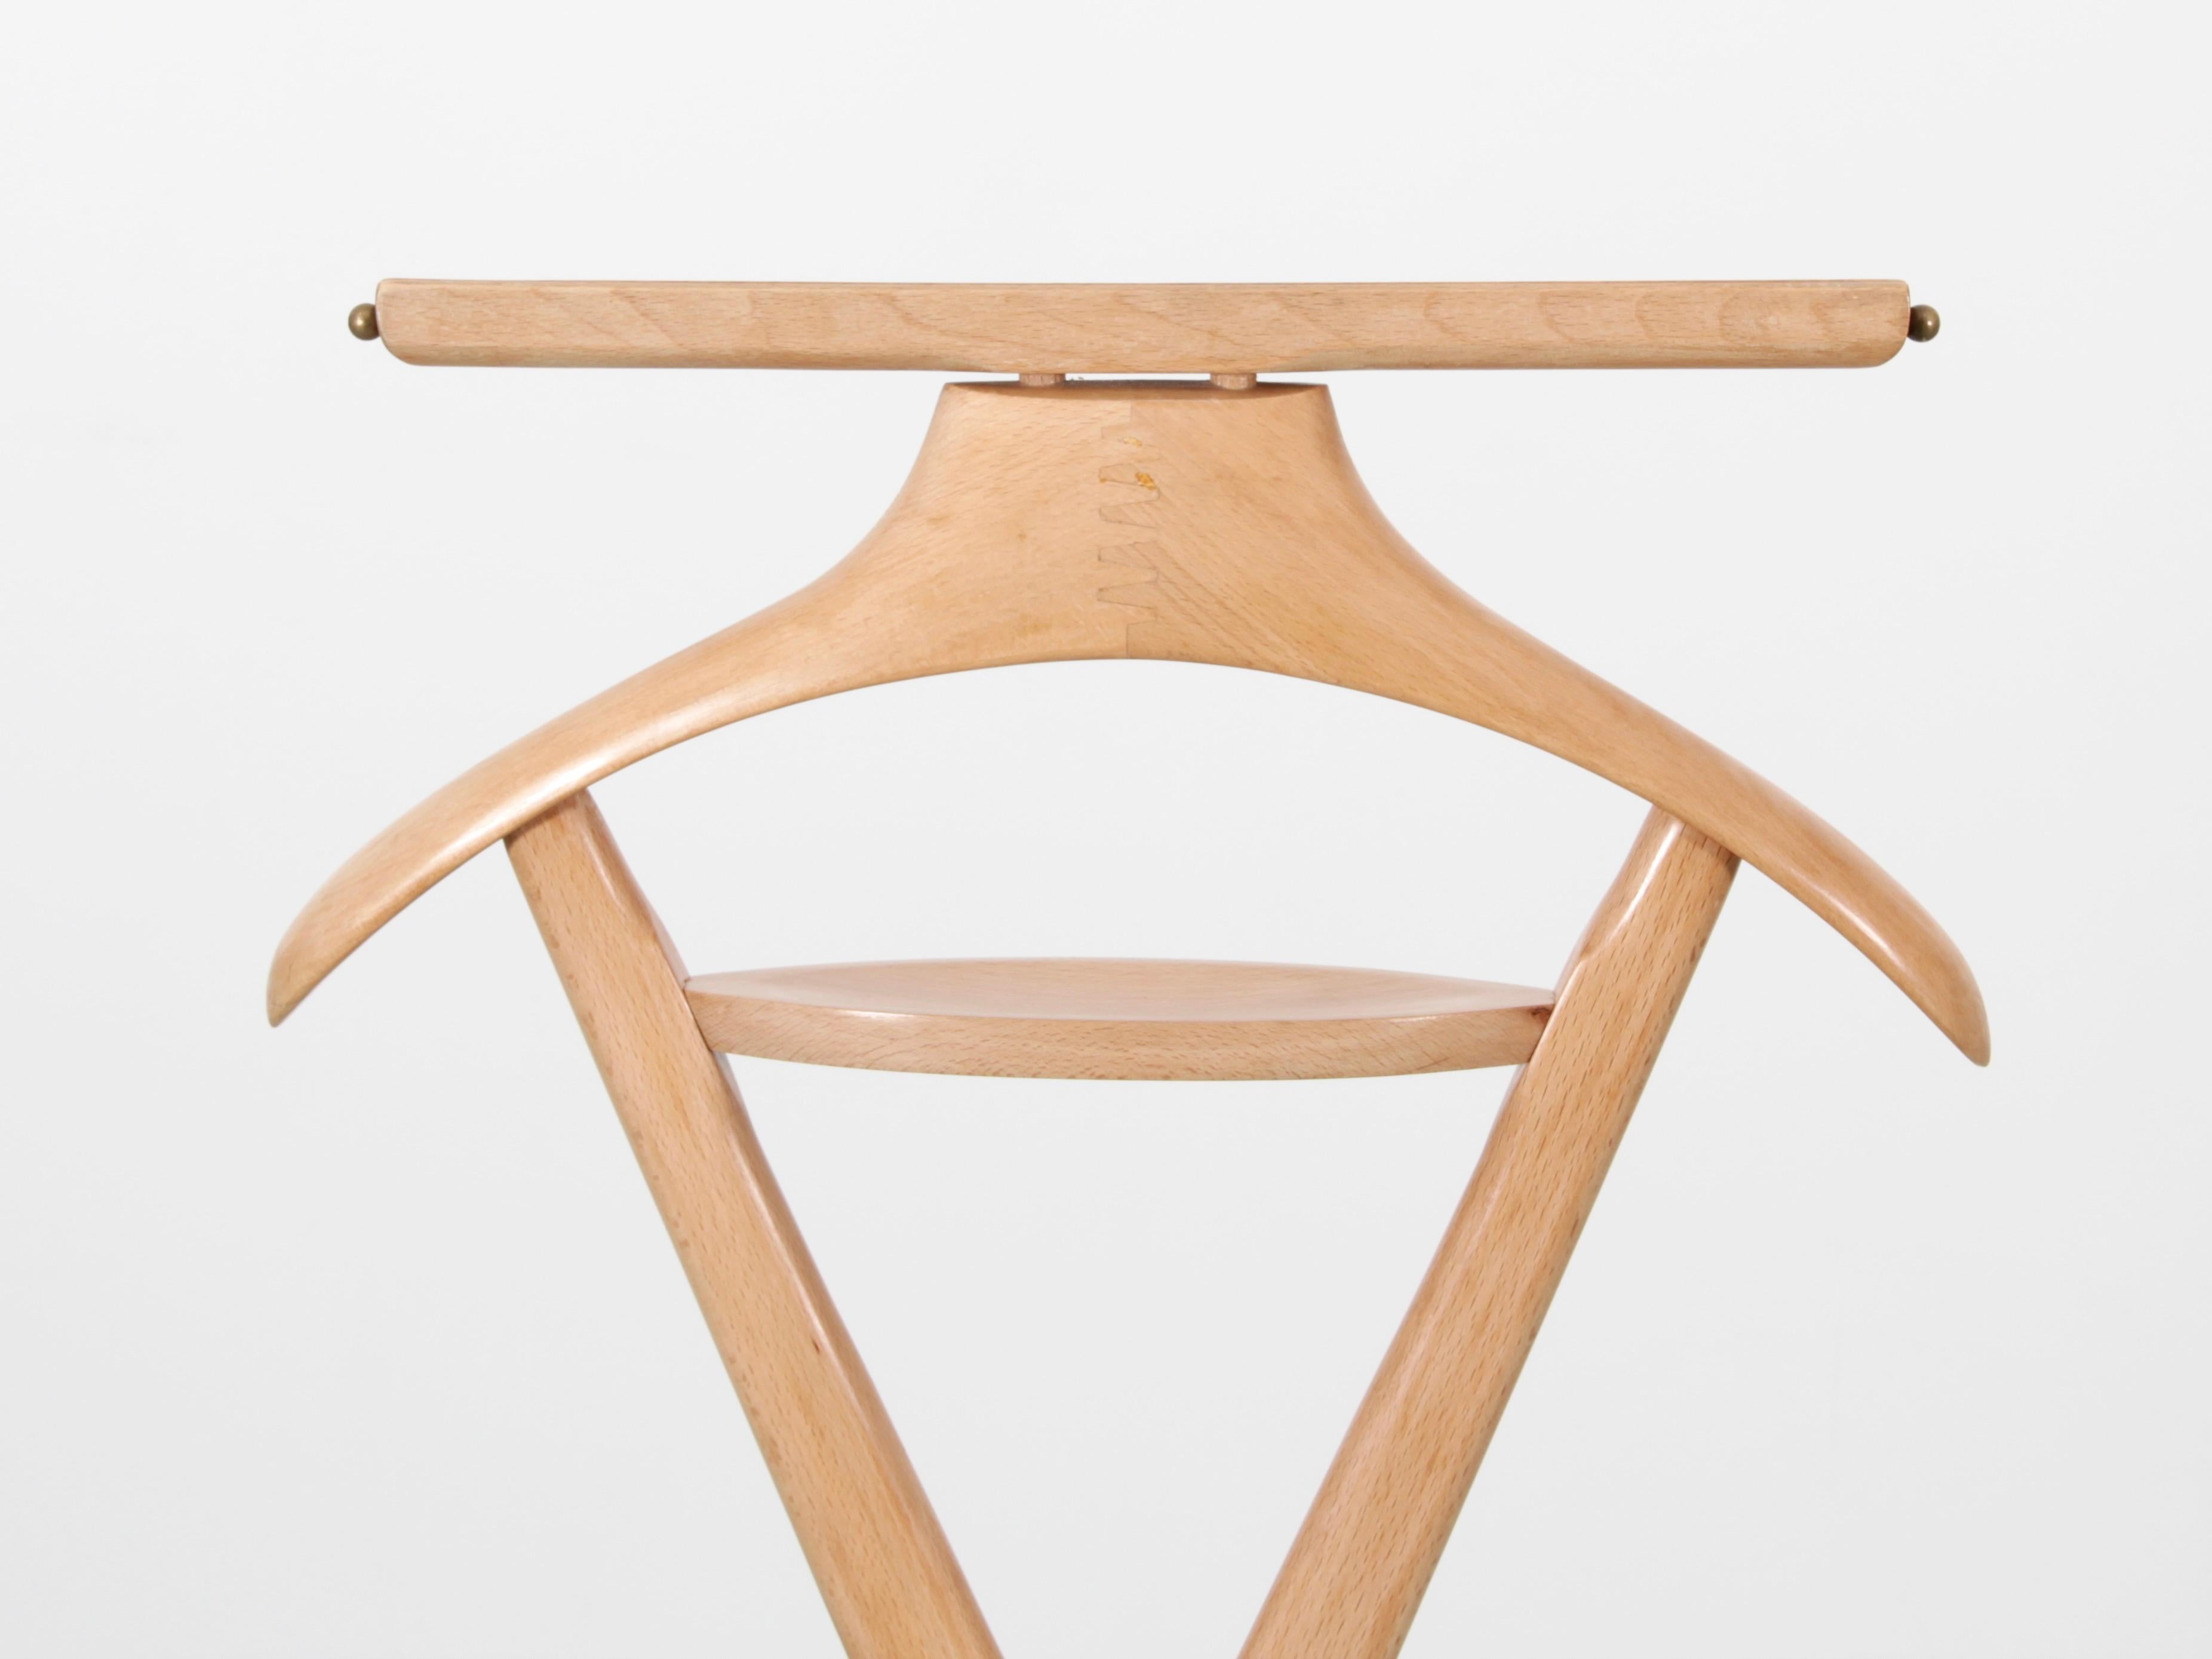 Mid-Century Modern valet clothes stand designed by Ico Parisi during the 1950s. Manufacturerd in Italy by Fratelli Reguitti, the stand is made of beech wood.